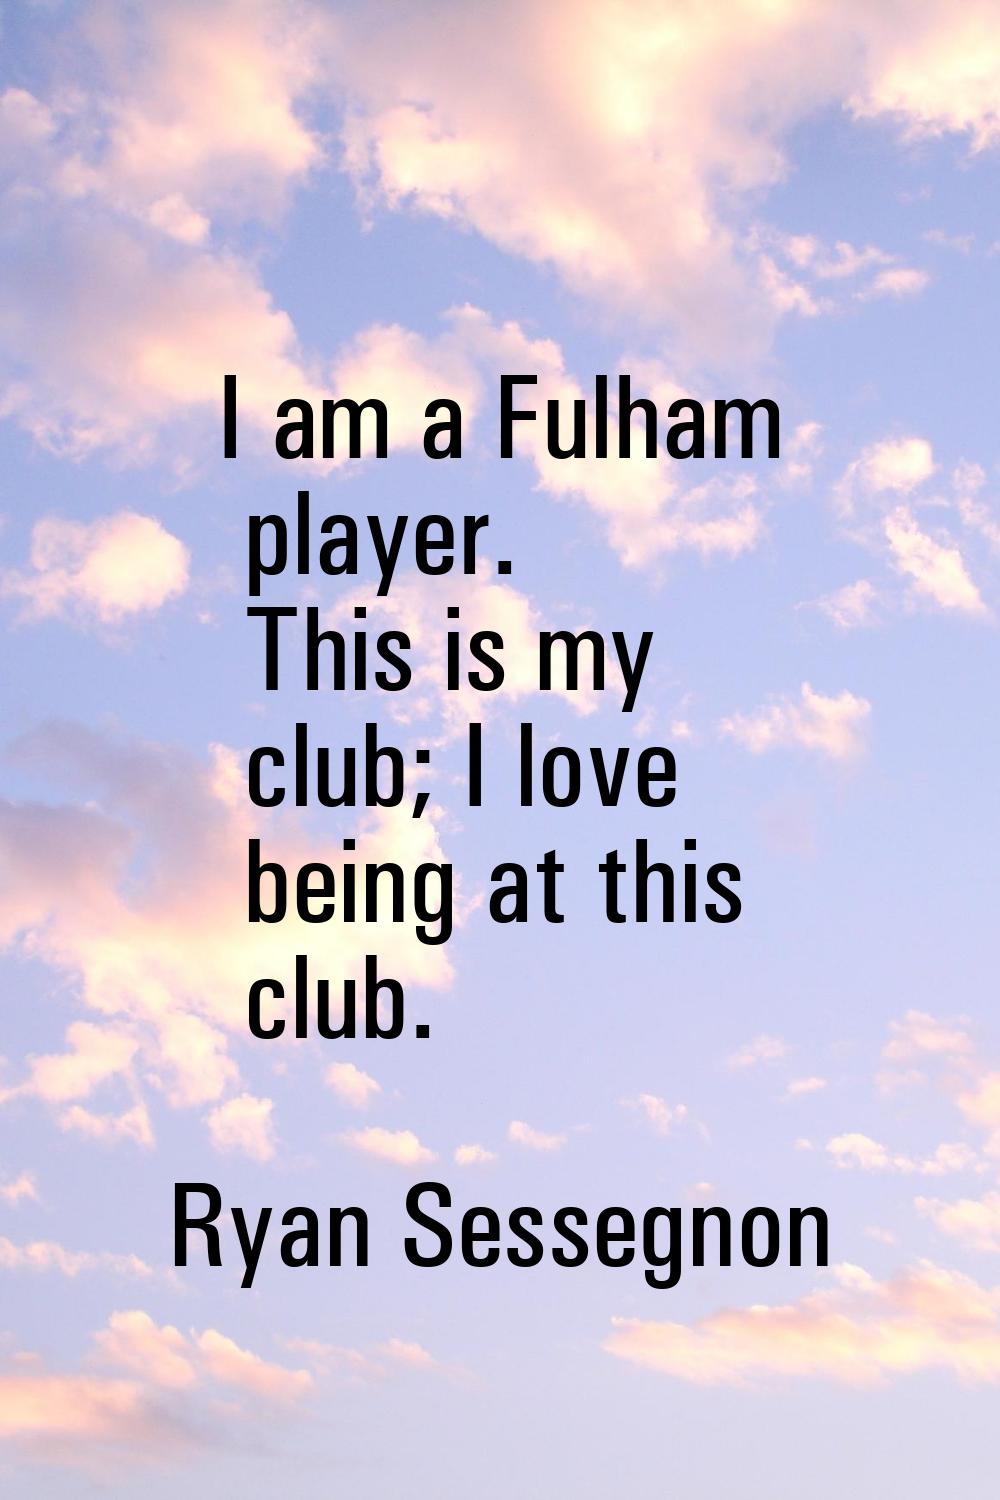 I am a Fulham player. This is my club; I love being at this club.